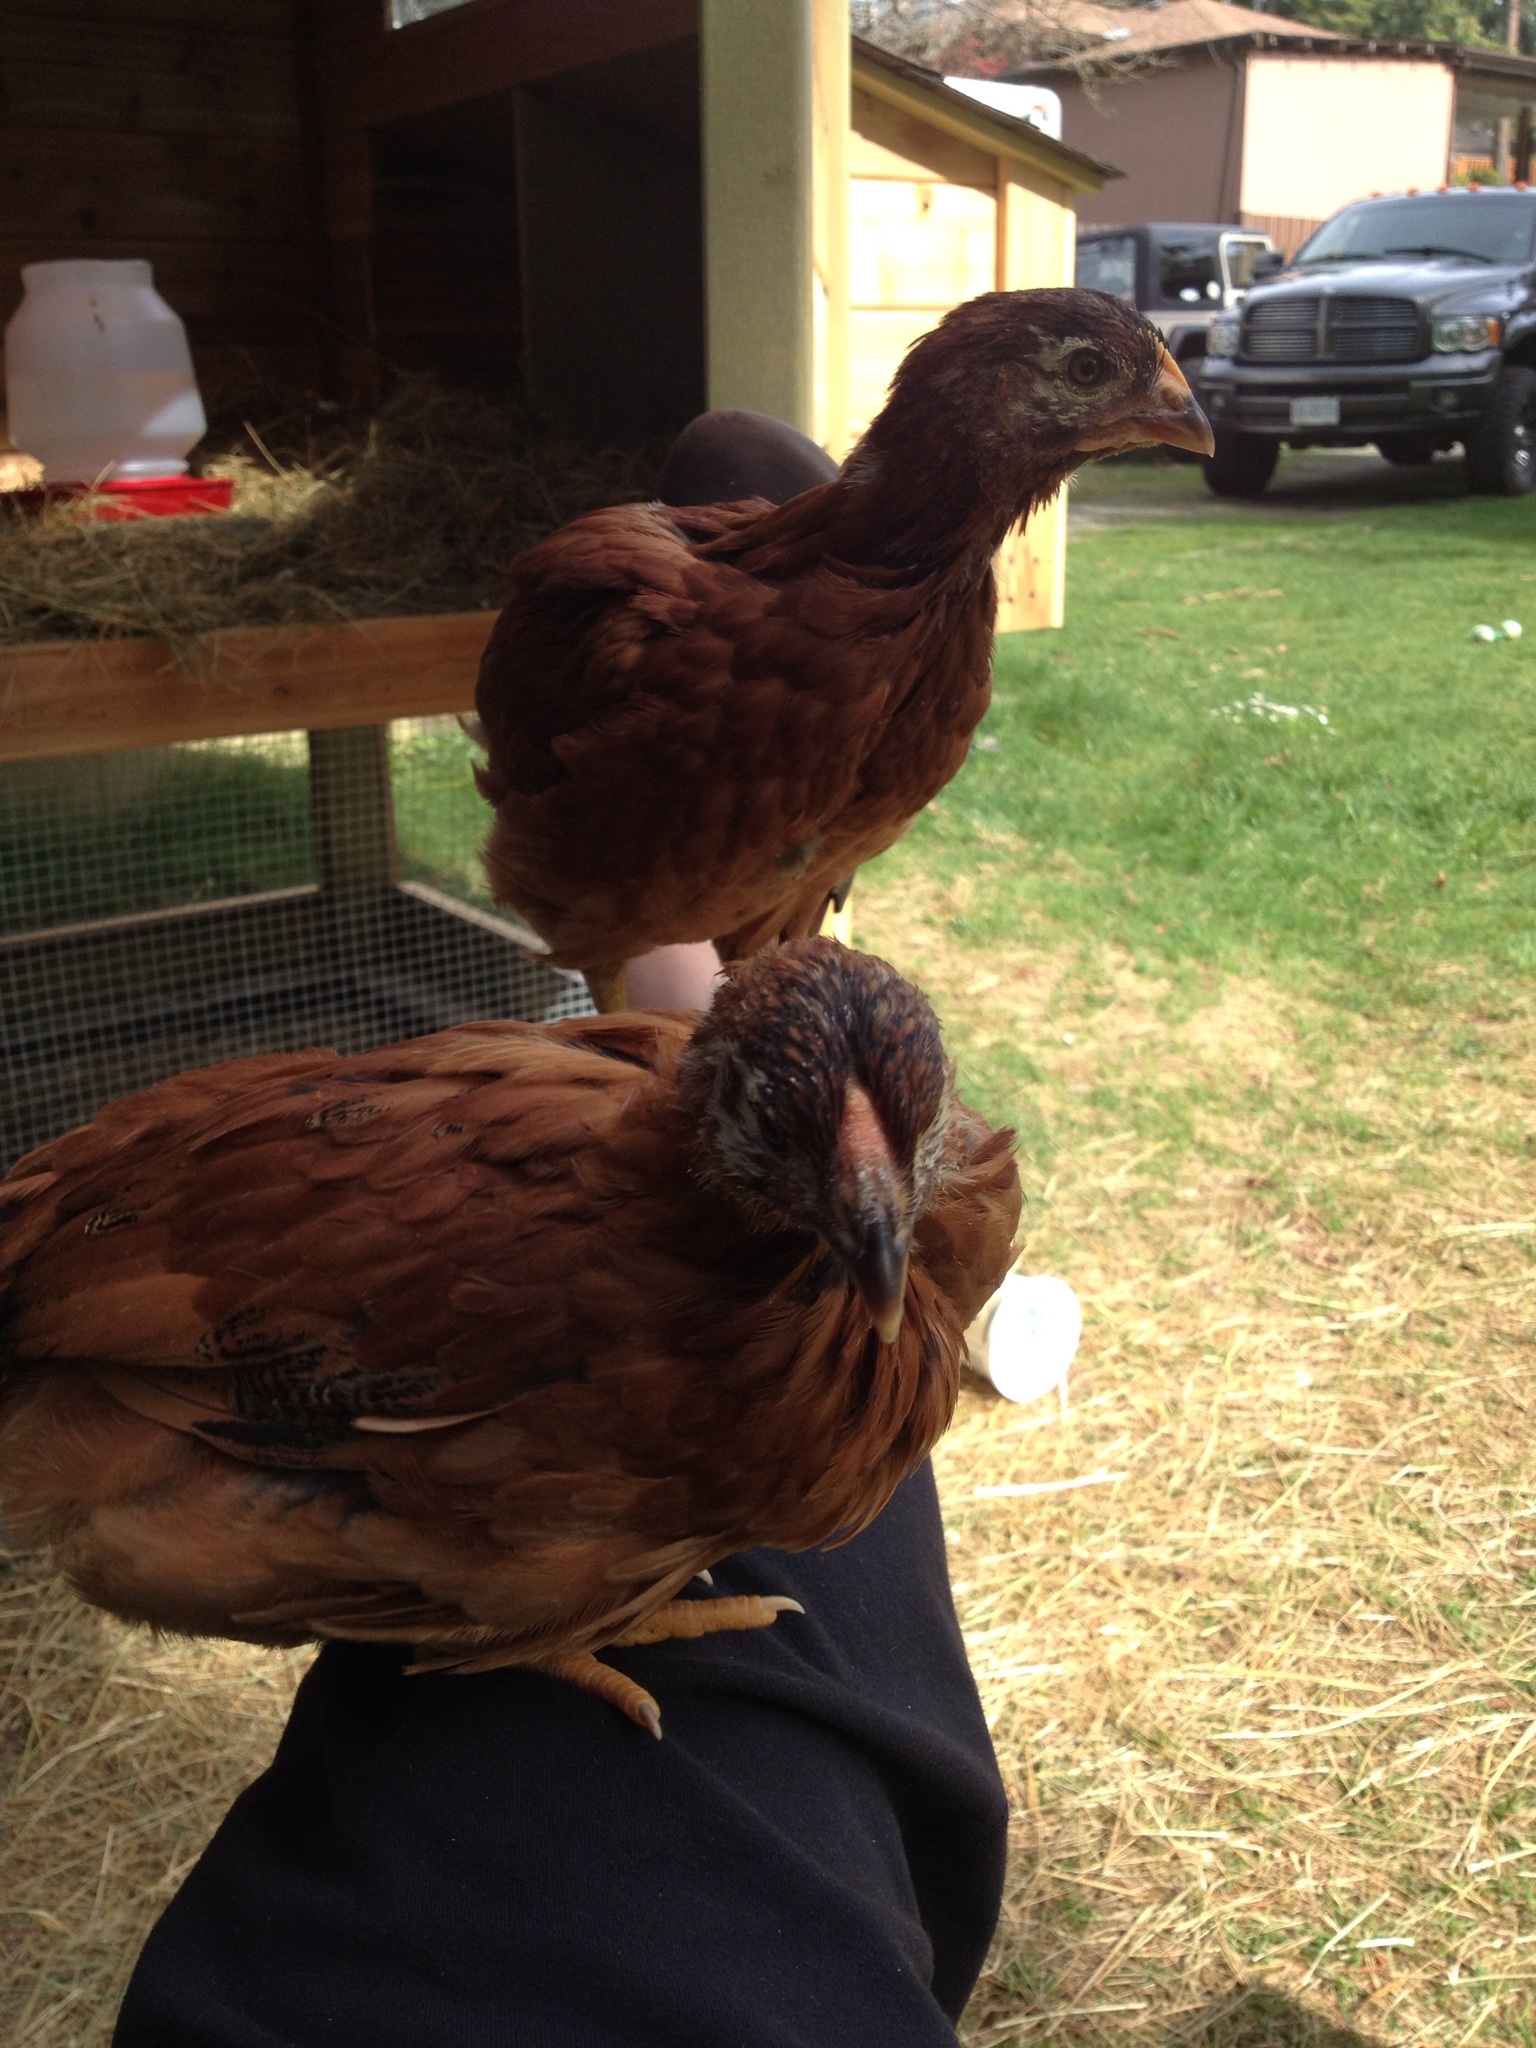 Girls jumped up and rested on my leg :)